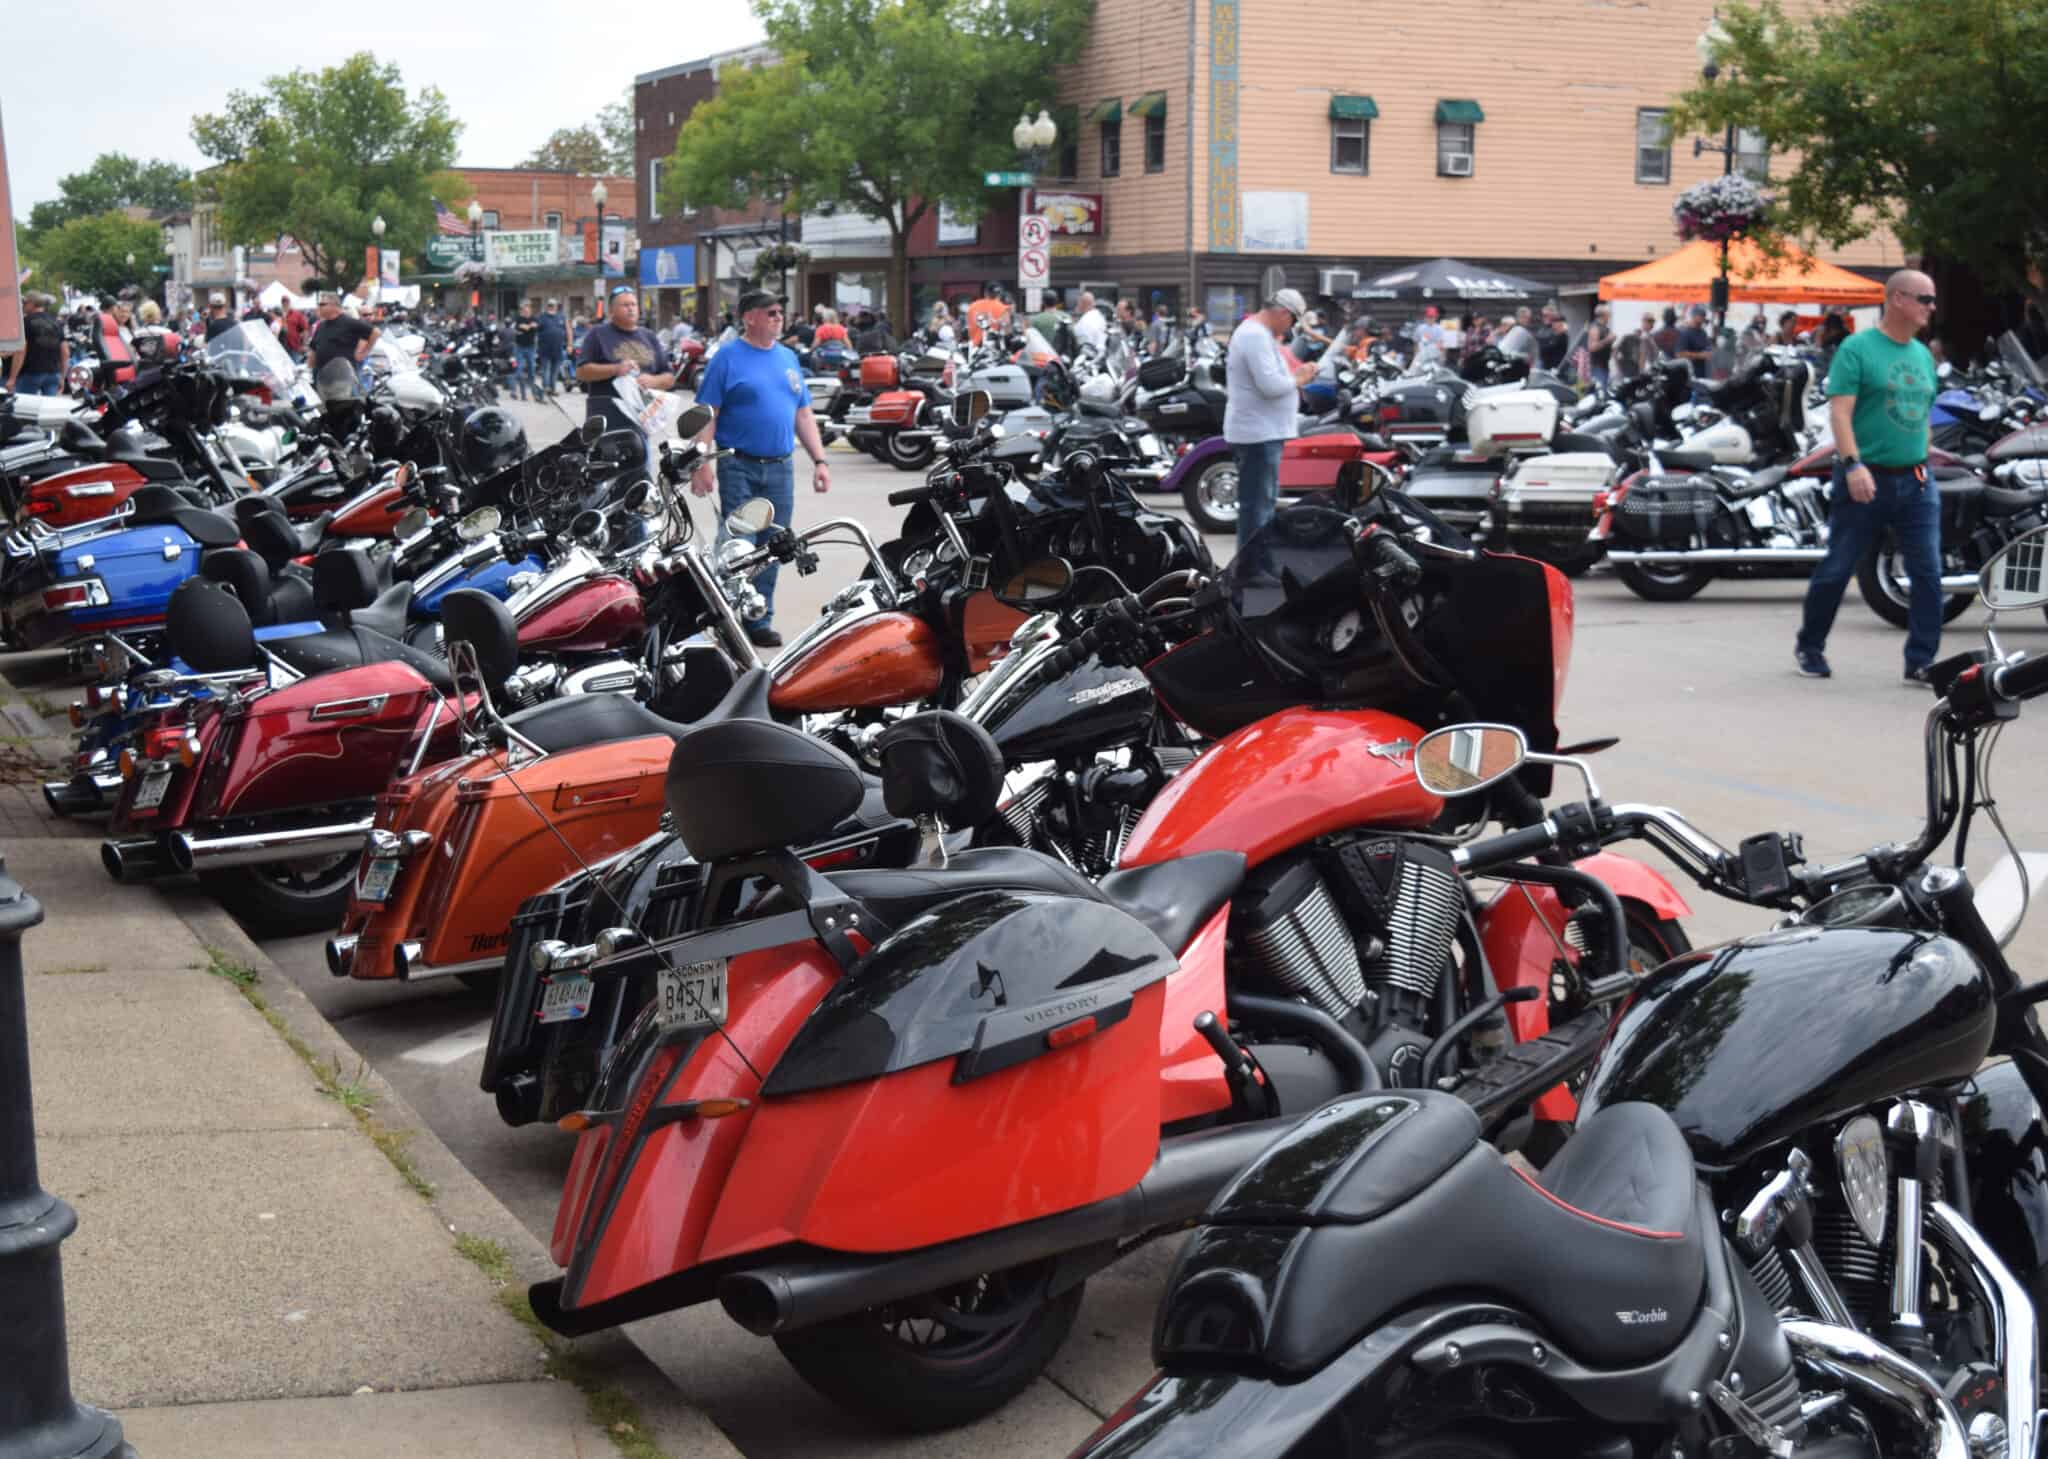 42 years and counting: Northwoods Fall Ride set to rumble into Tomahawk once again